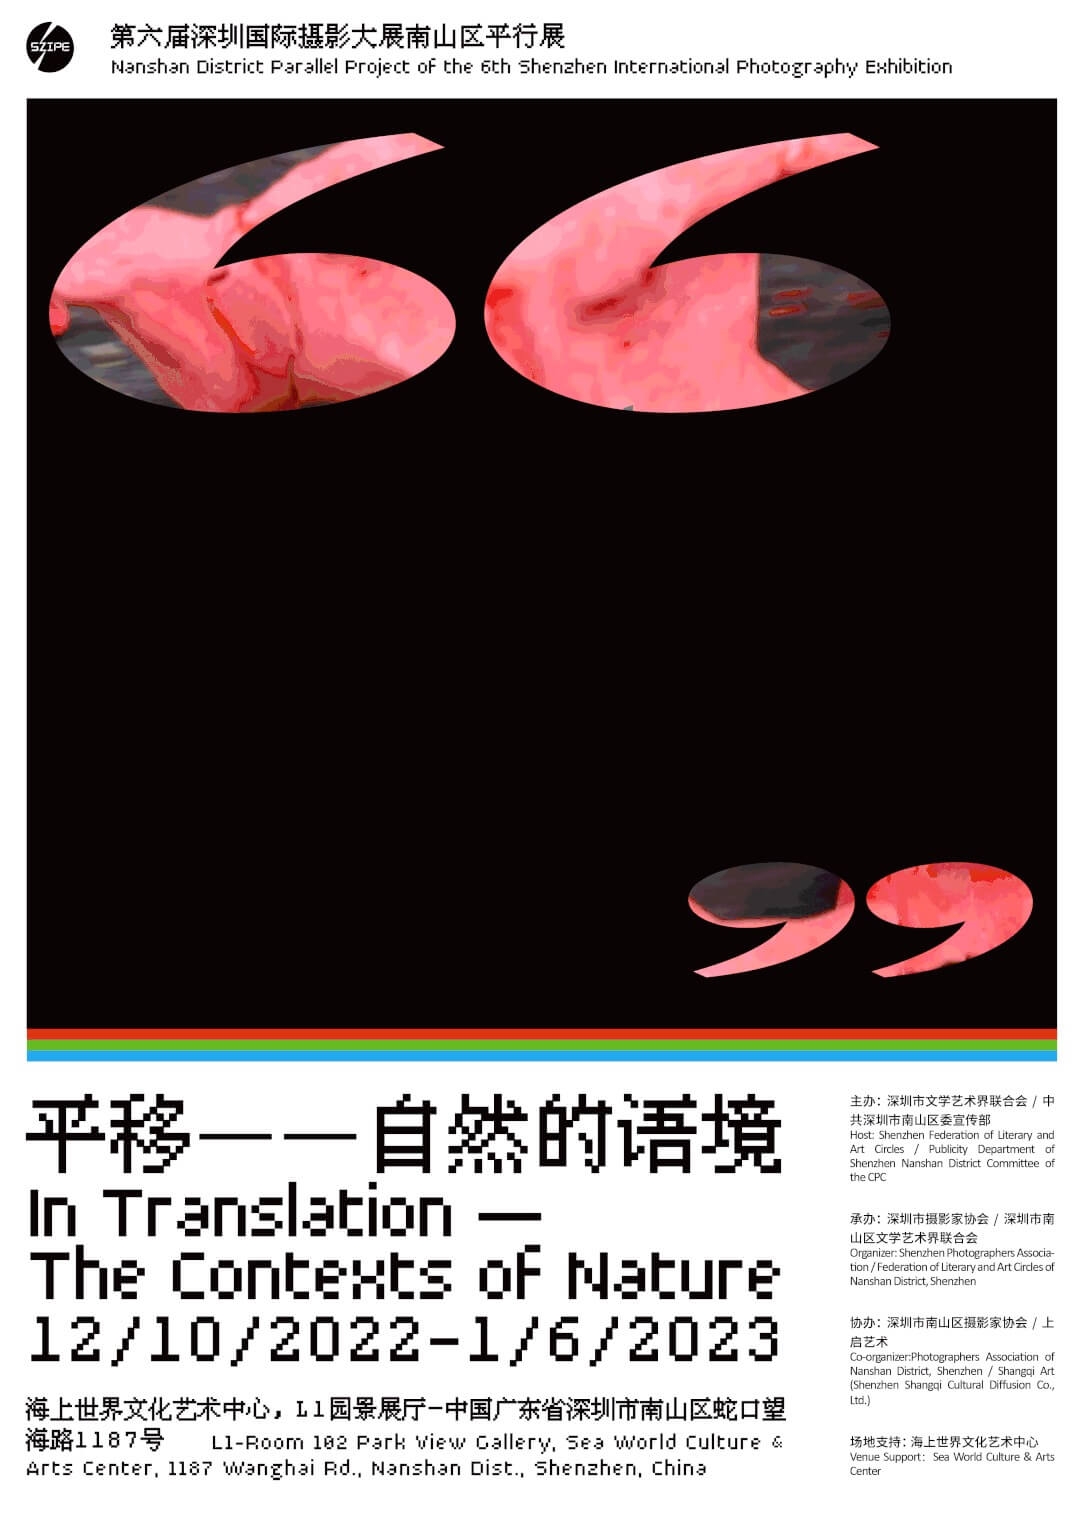 In Traslation The Contexts of Nature Tang Han Shenzhen 2 -